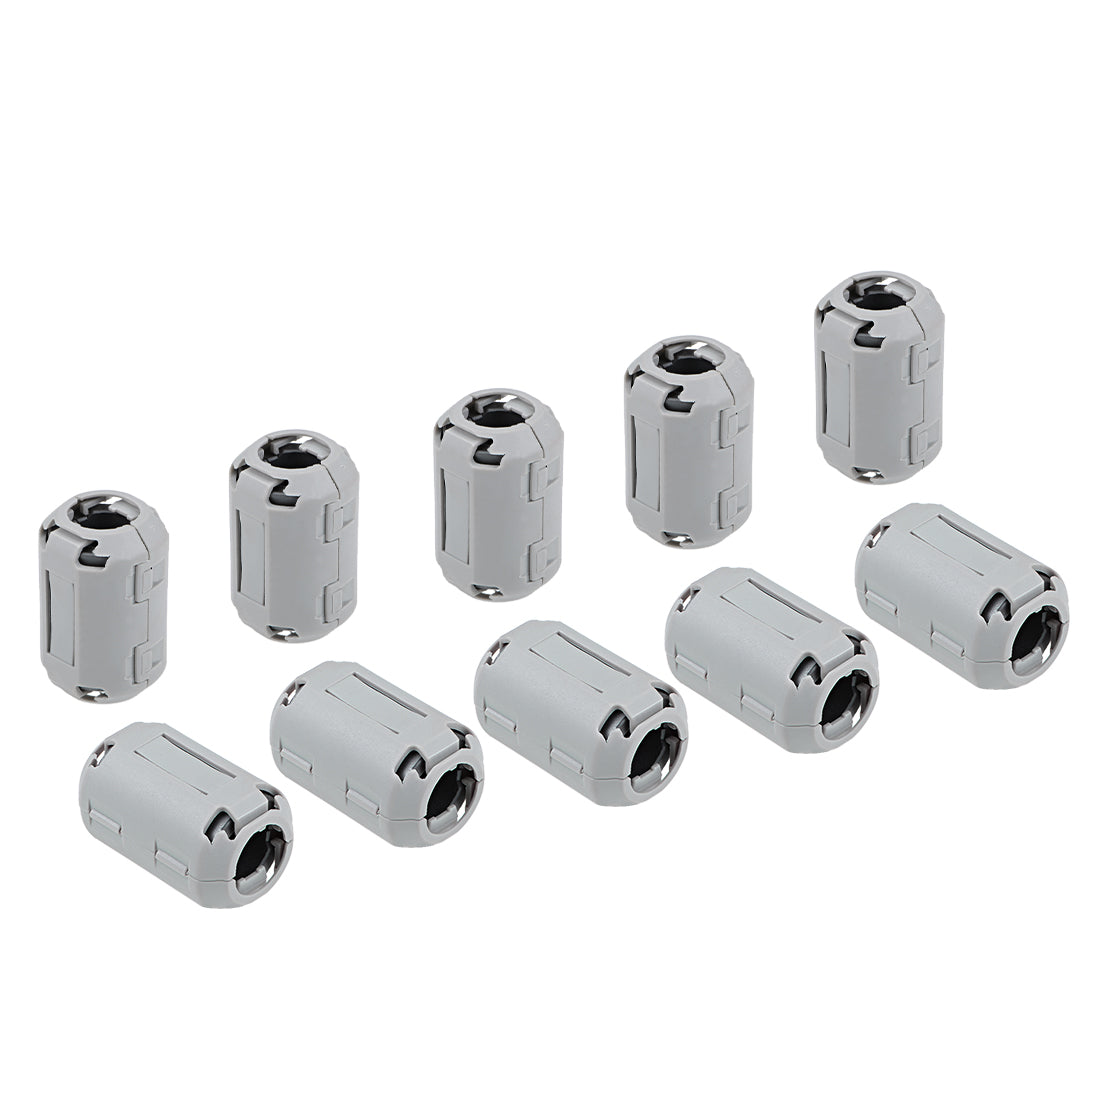 uxcell Uxcell Ferrite Cores Ring Clip-On RFI EMI Noise Suppression Filter Cable Clip 10pcs